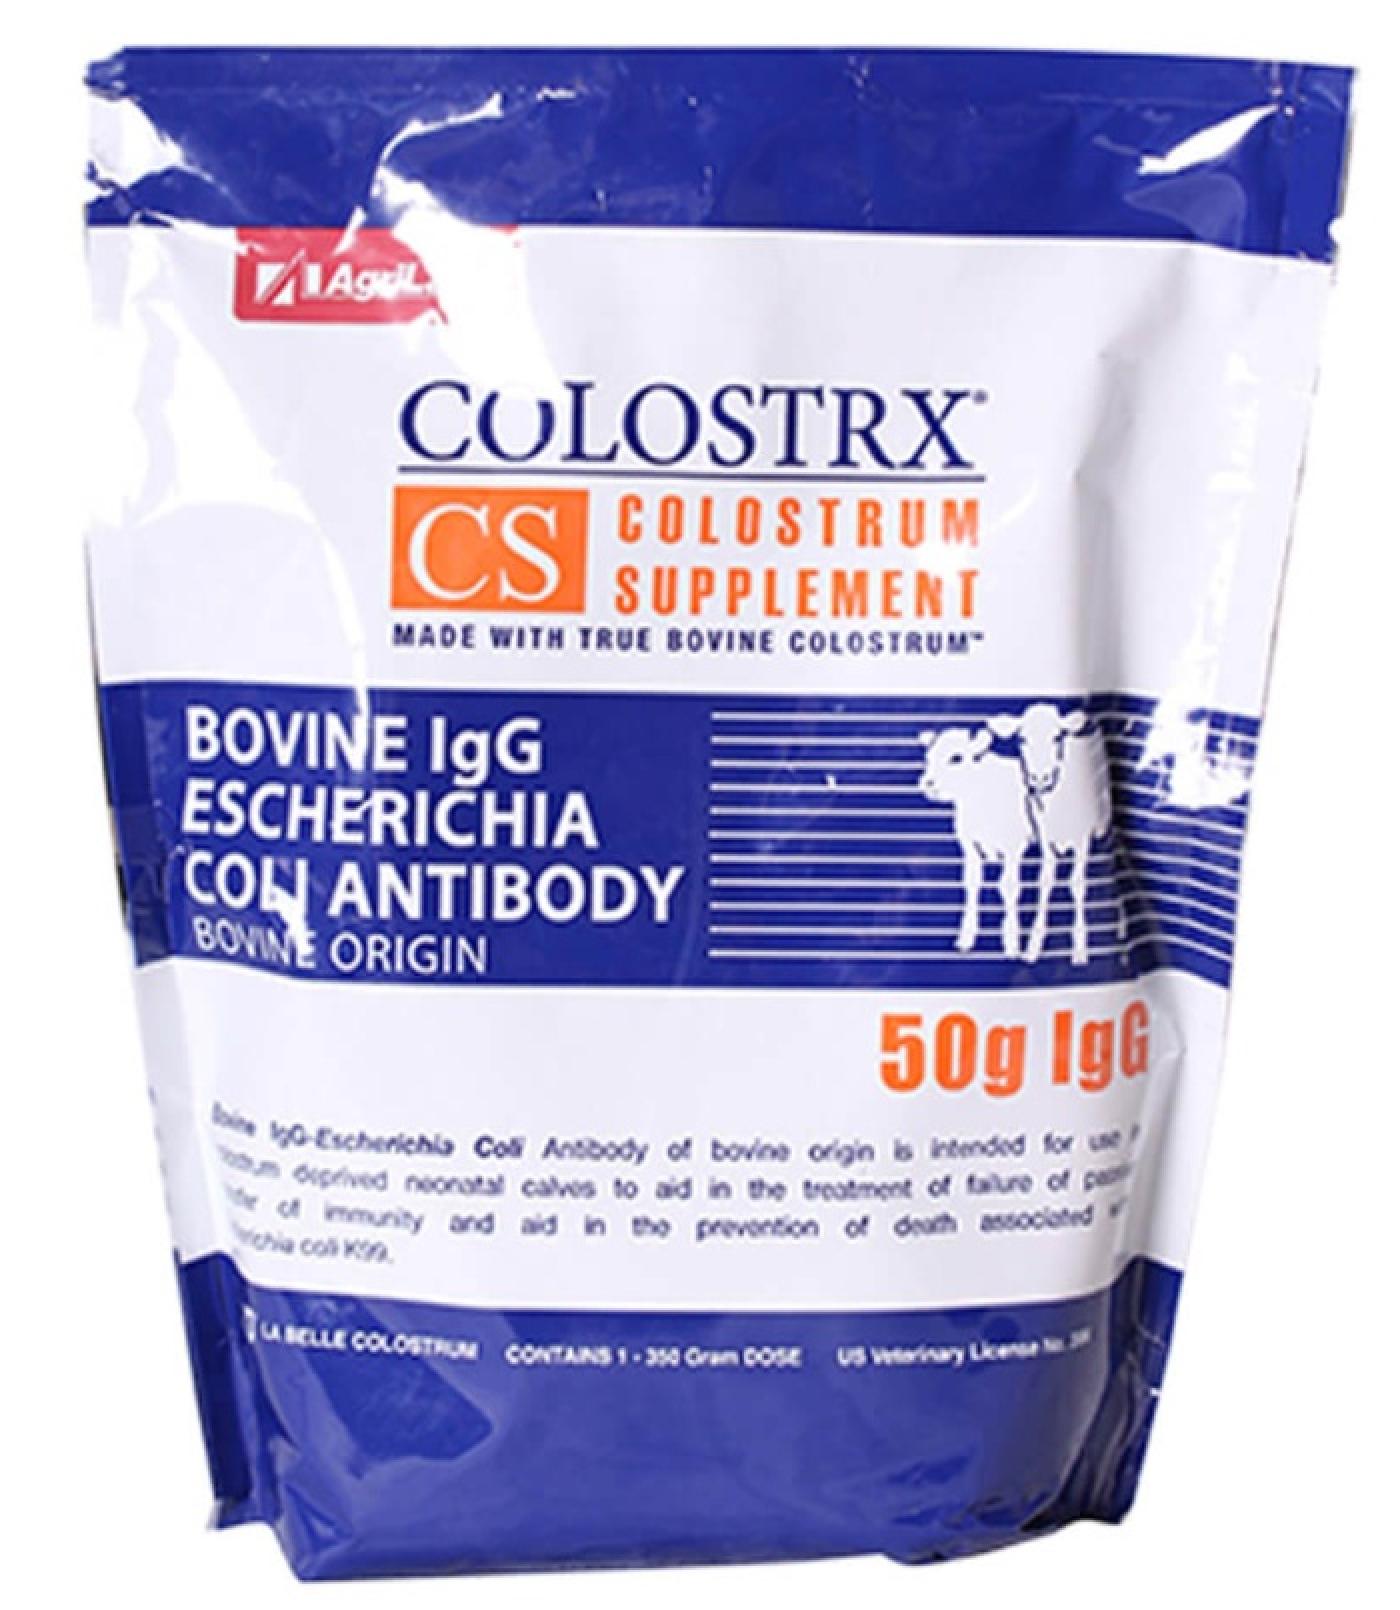 AgriLabs Colostrx CS Colostrum Supplement